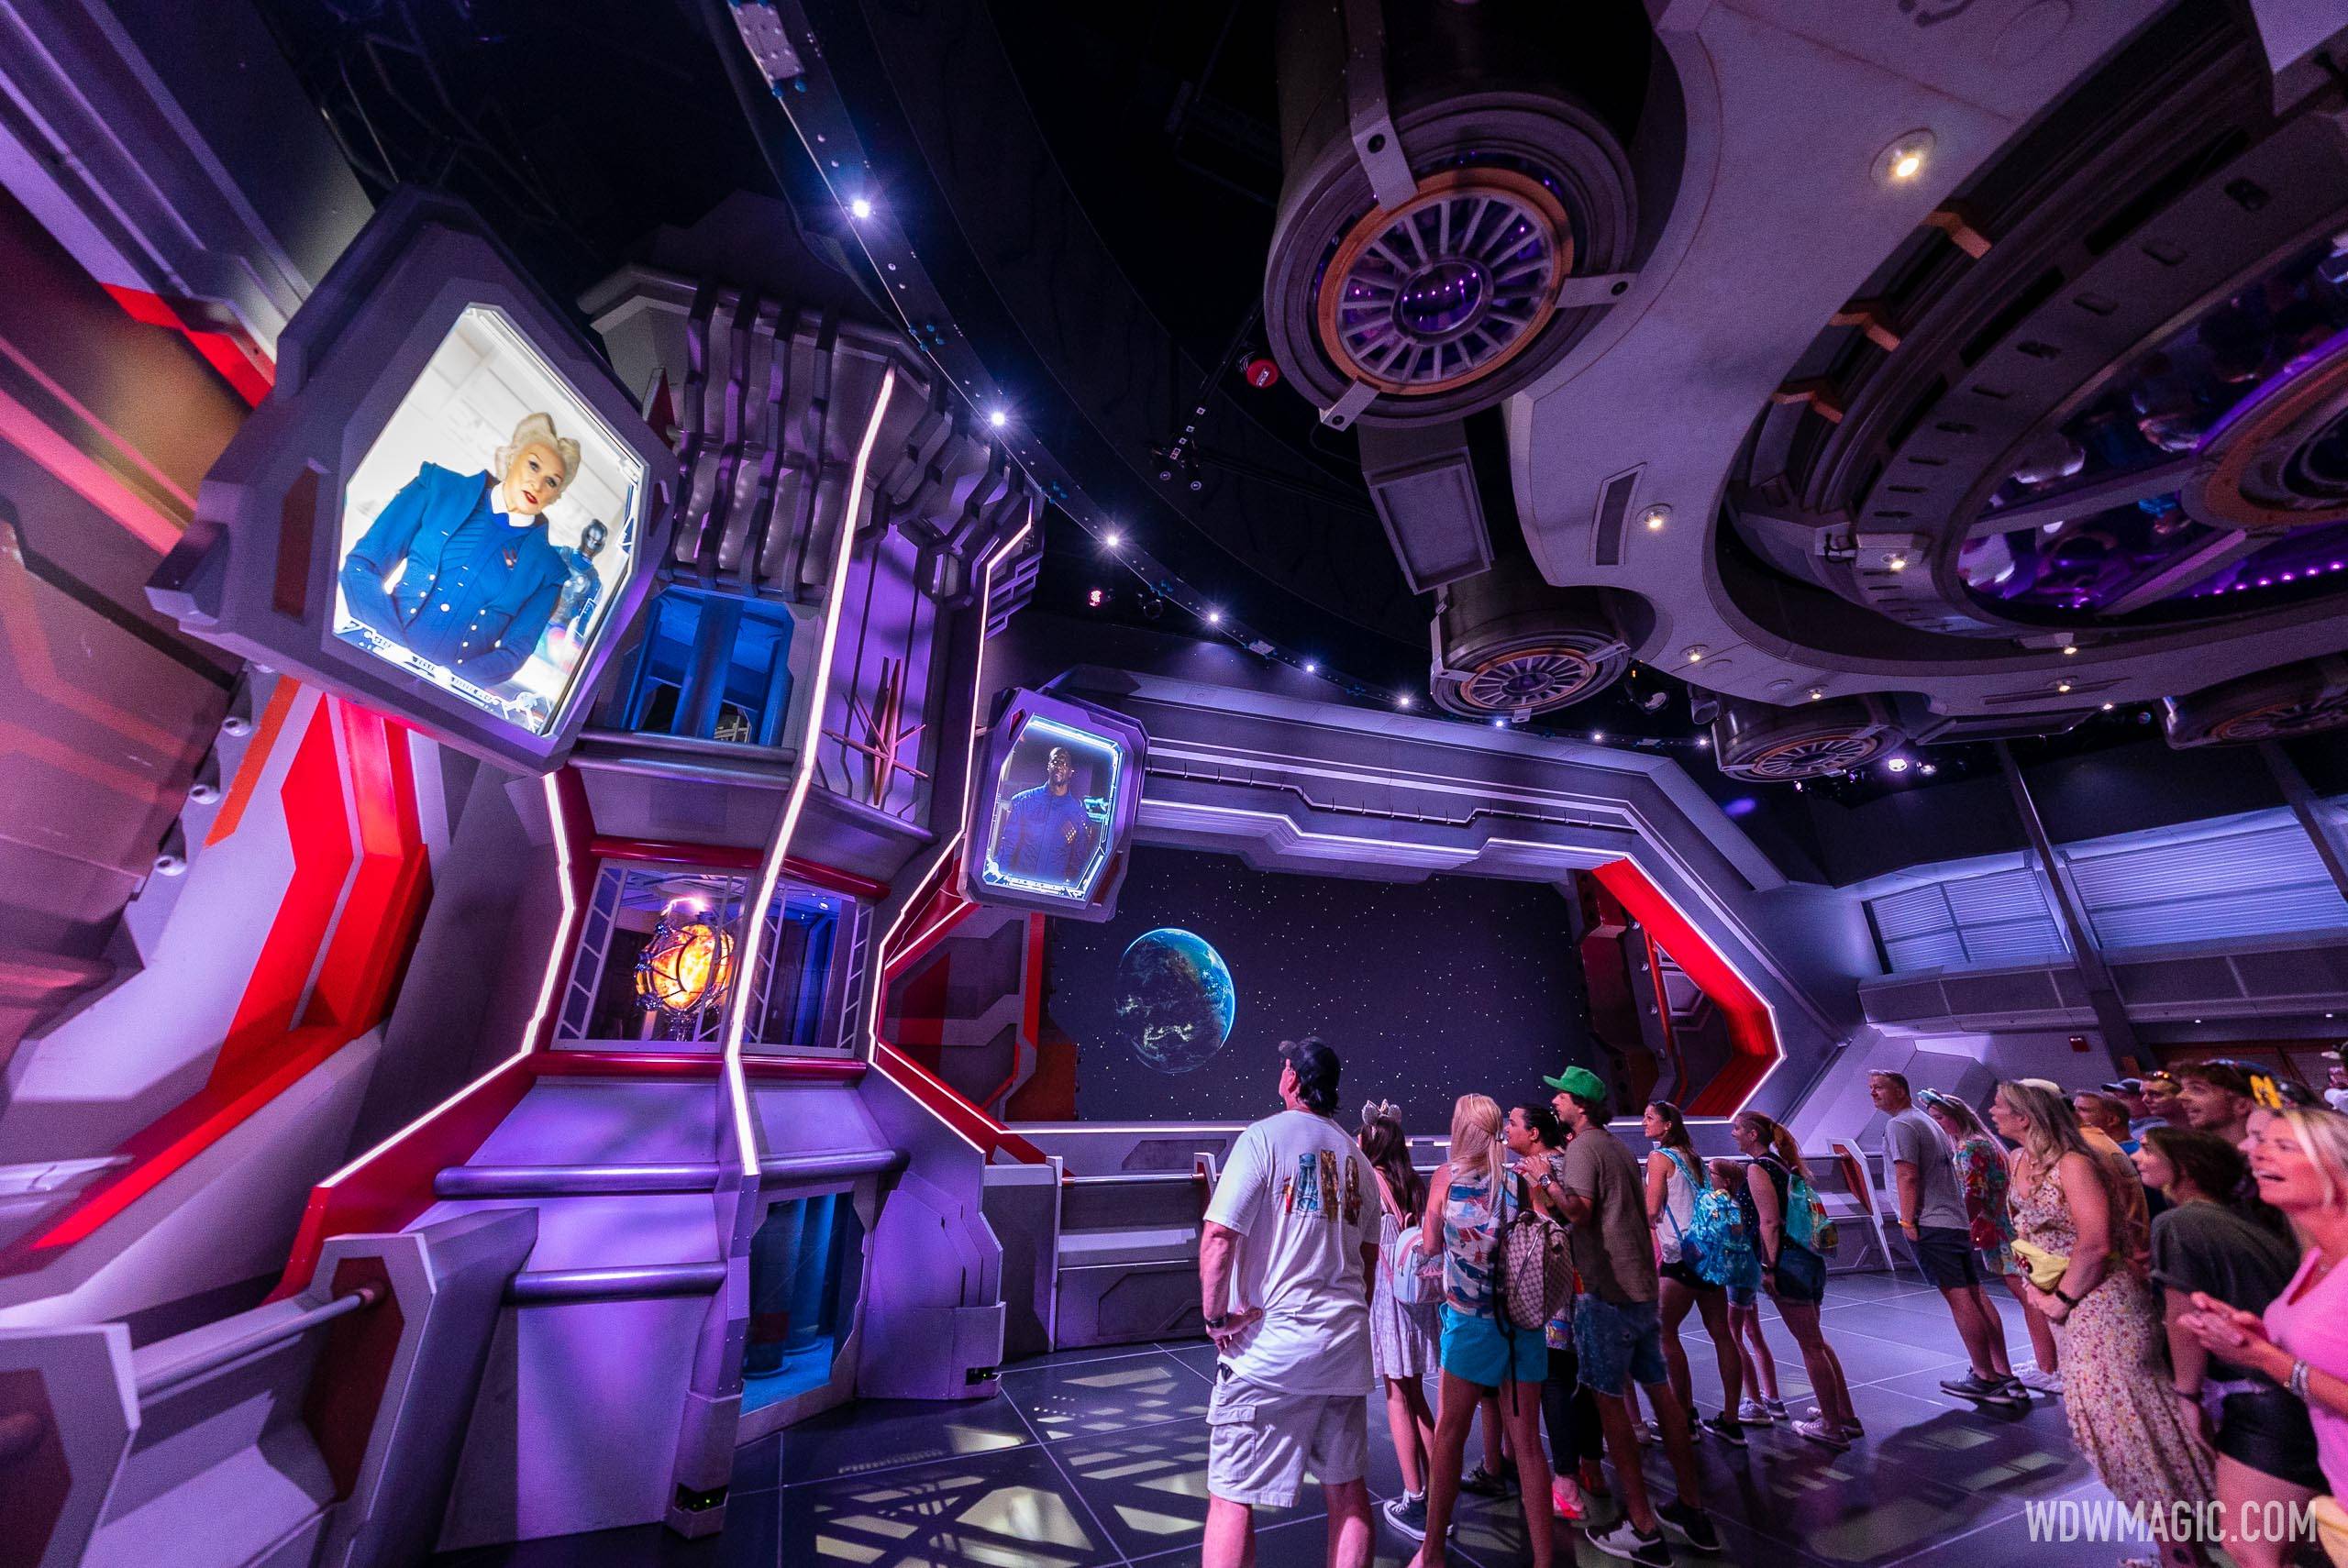 The pre-show rooms have been bypassed in recent days to keep the ride operational